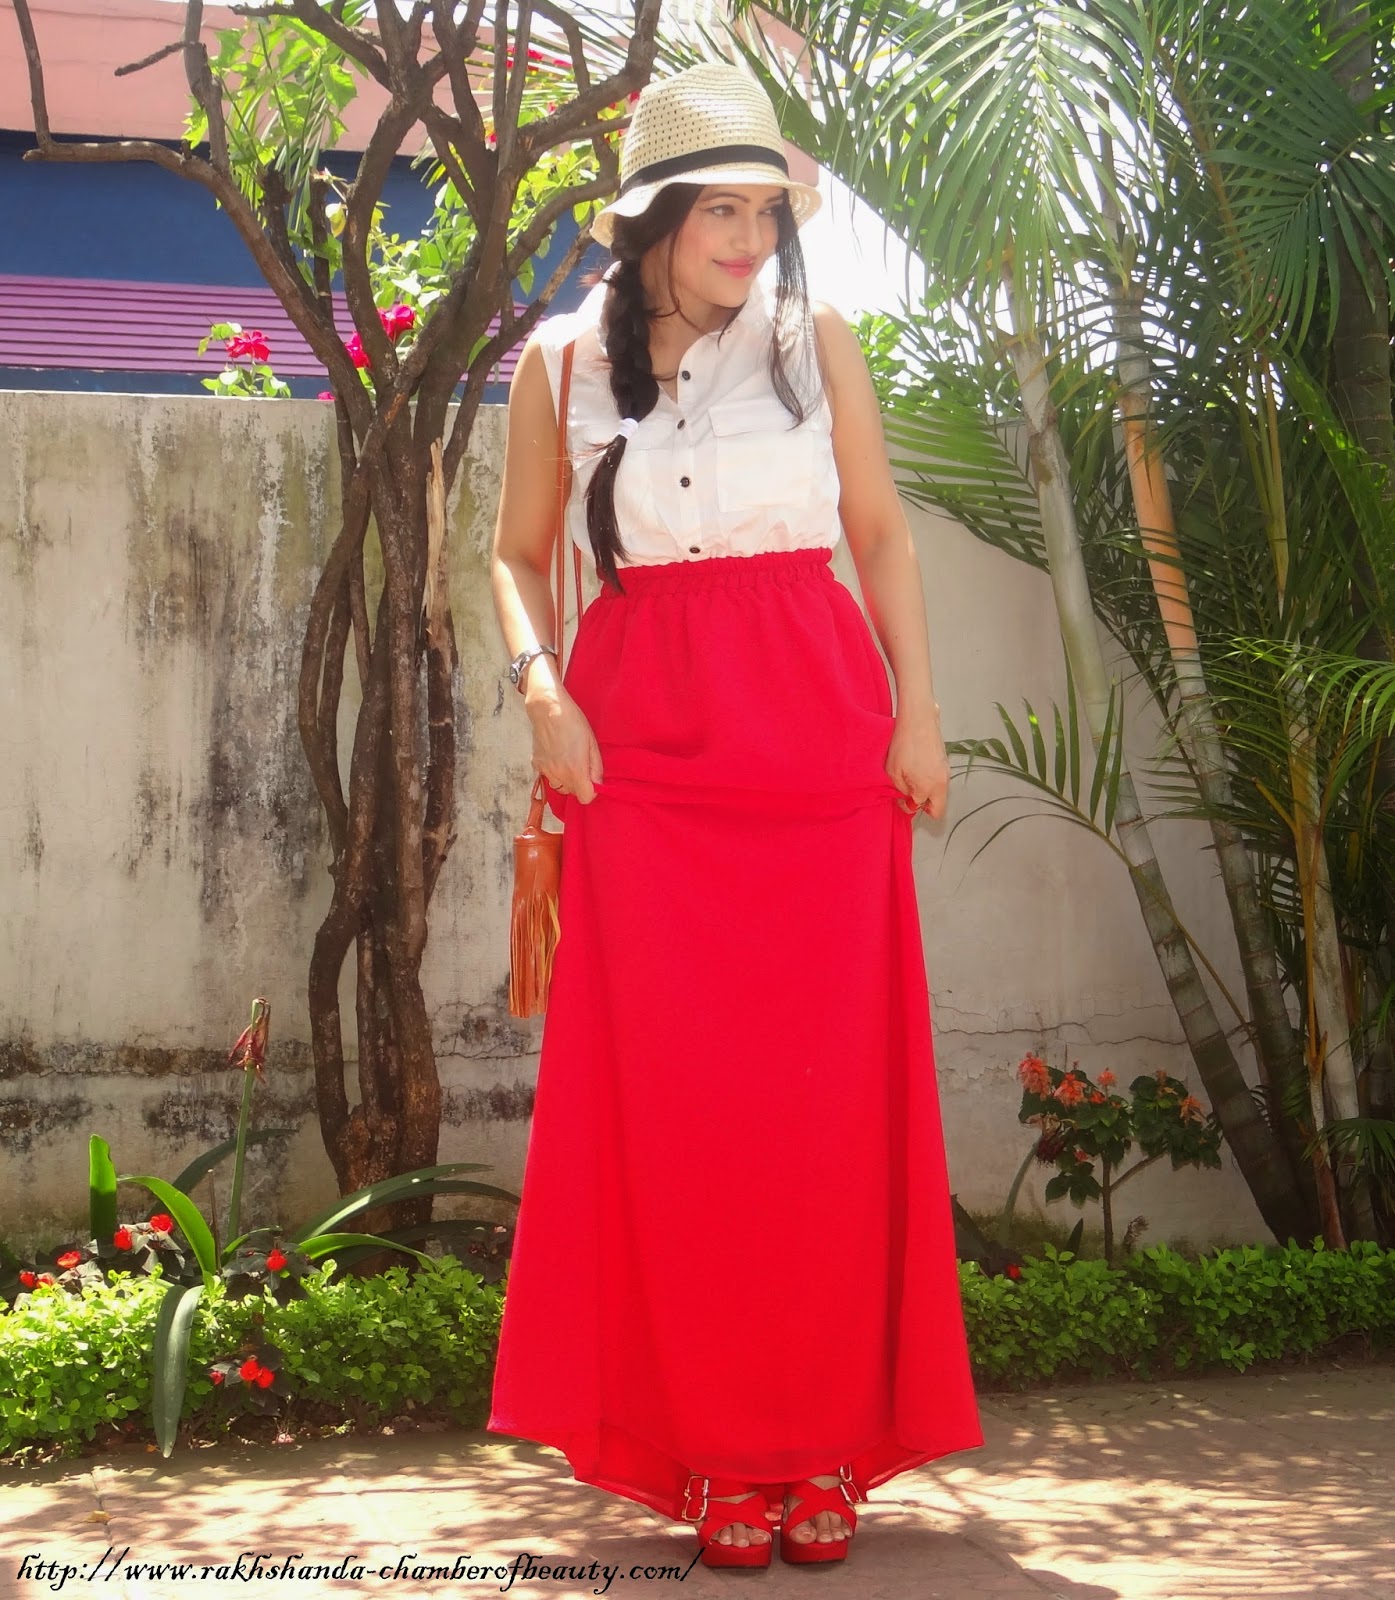 Red and White Maxi dress- OOTD | Chamber of beauty